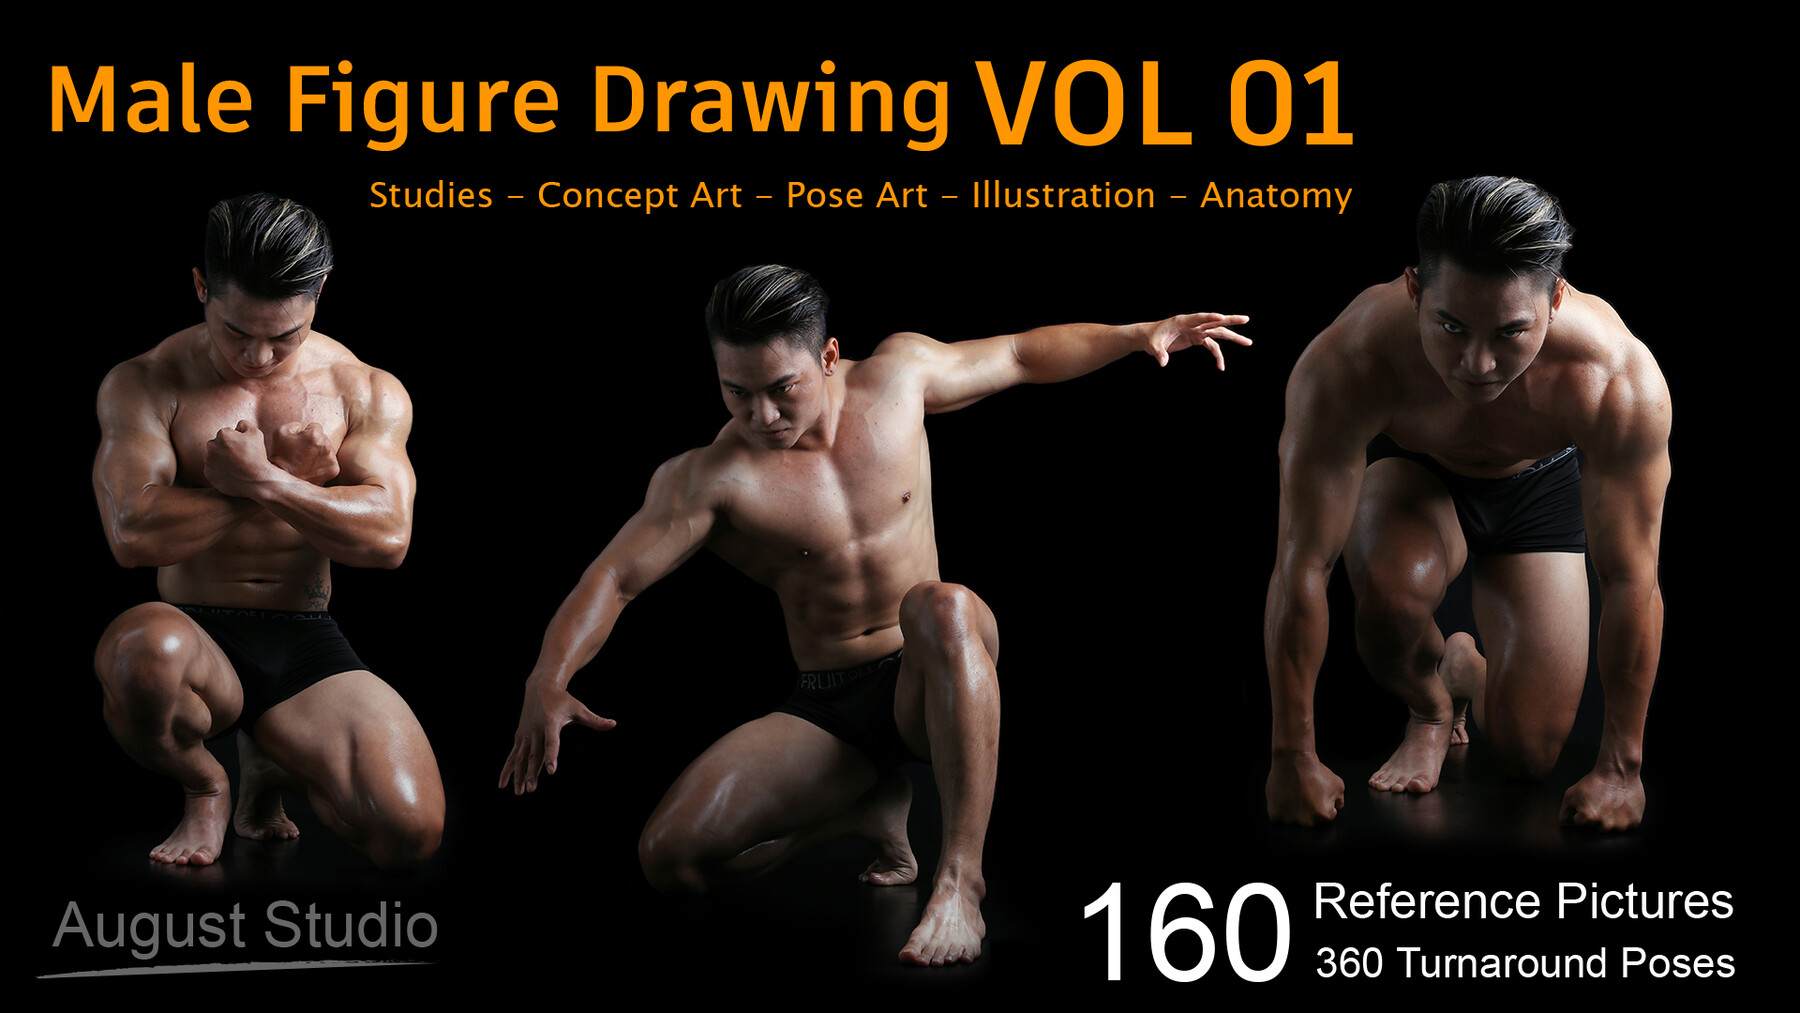 ArtStation - Male Figure Drawing - Vol 01 - Reference Pictures | Resources